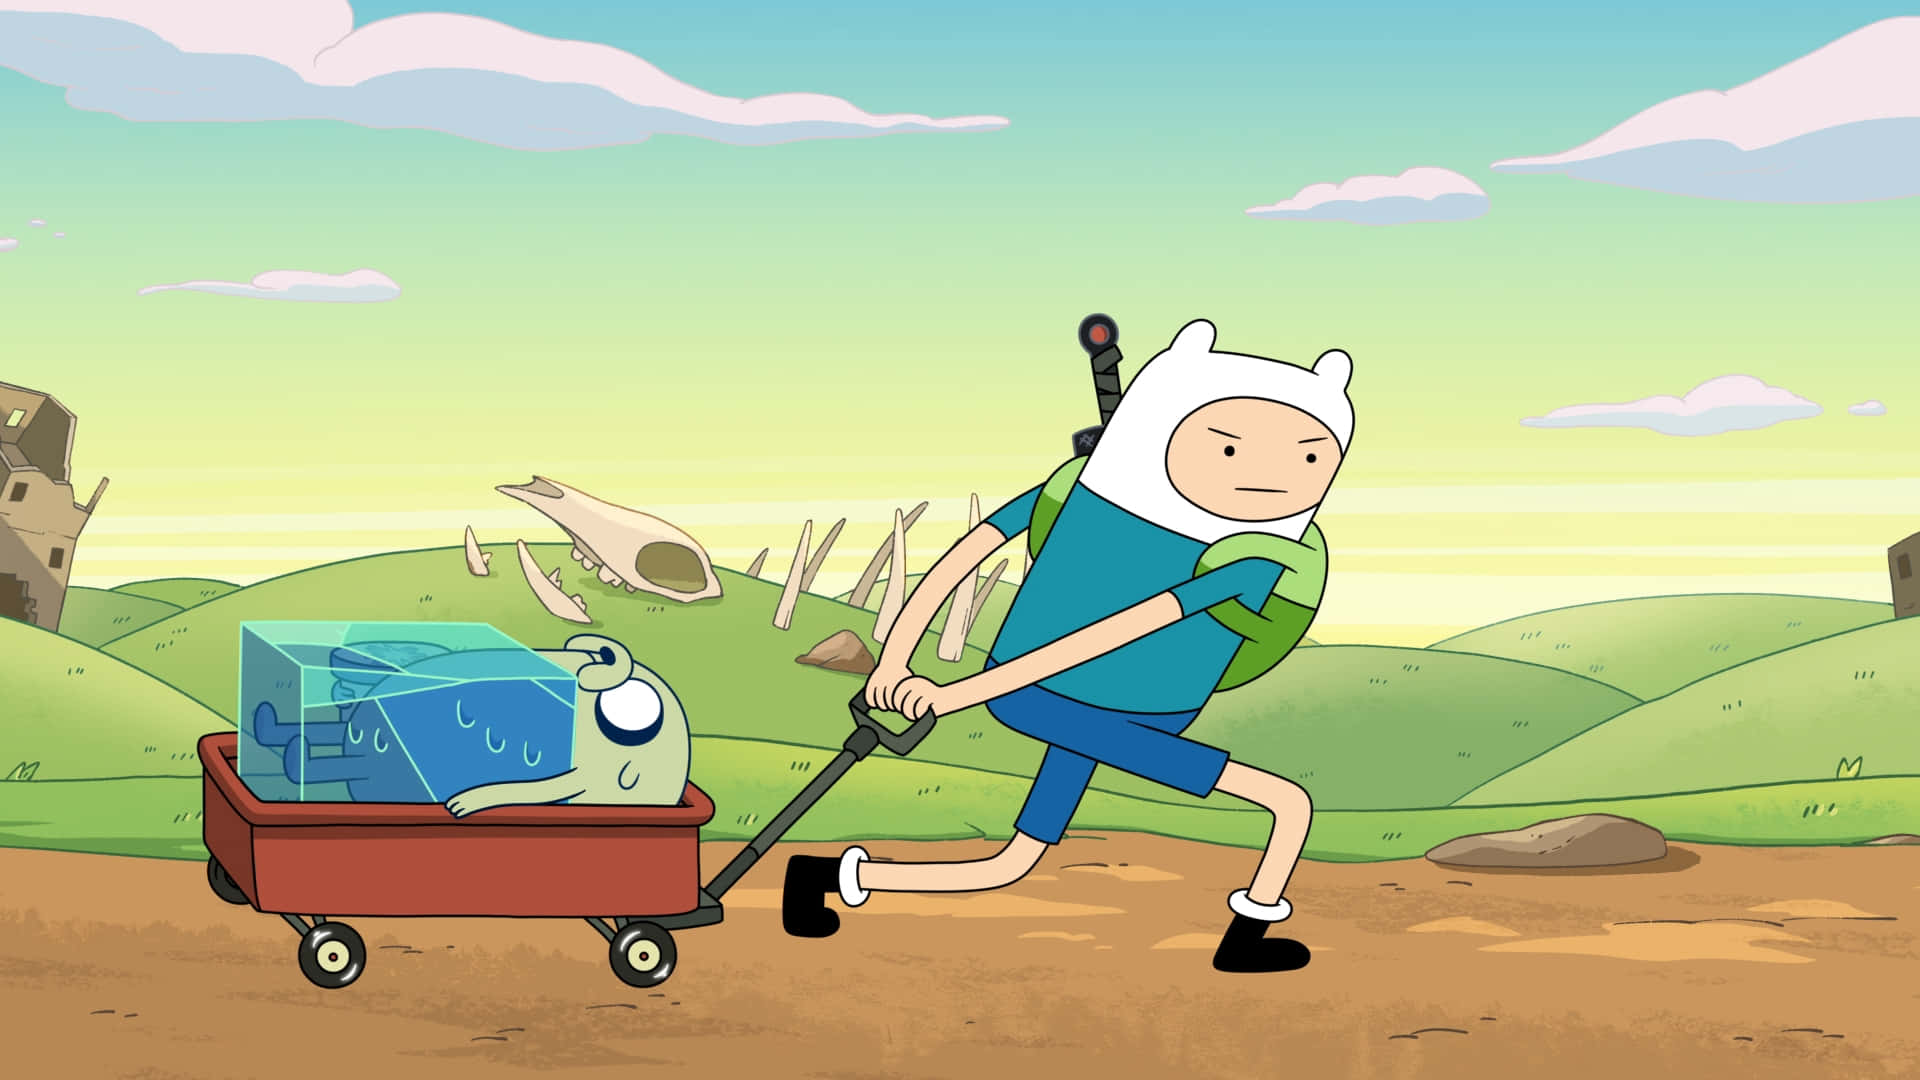 Adventure Time Pictures